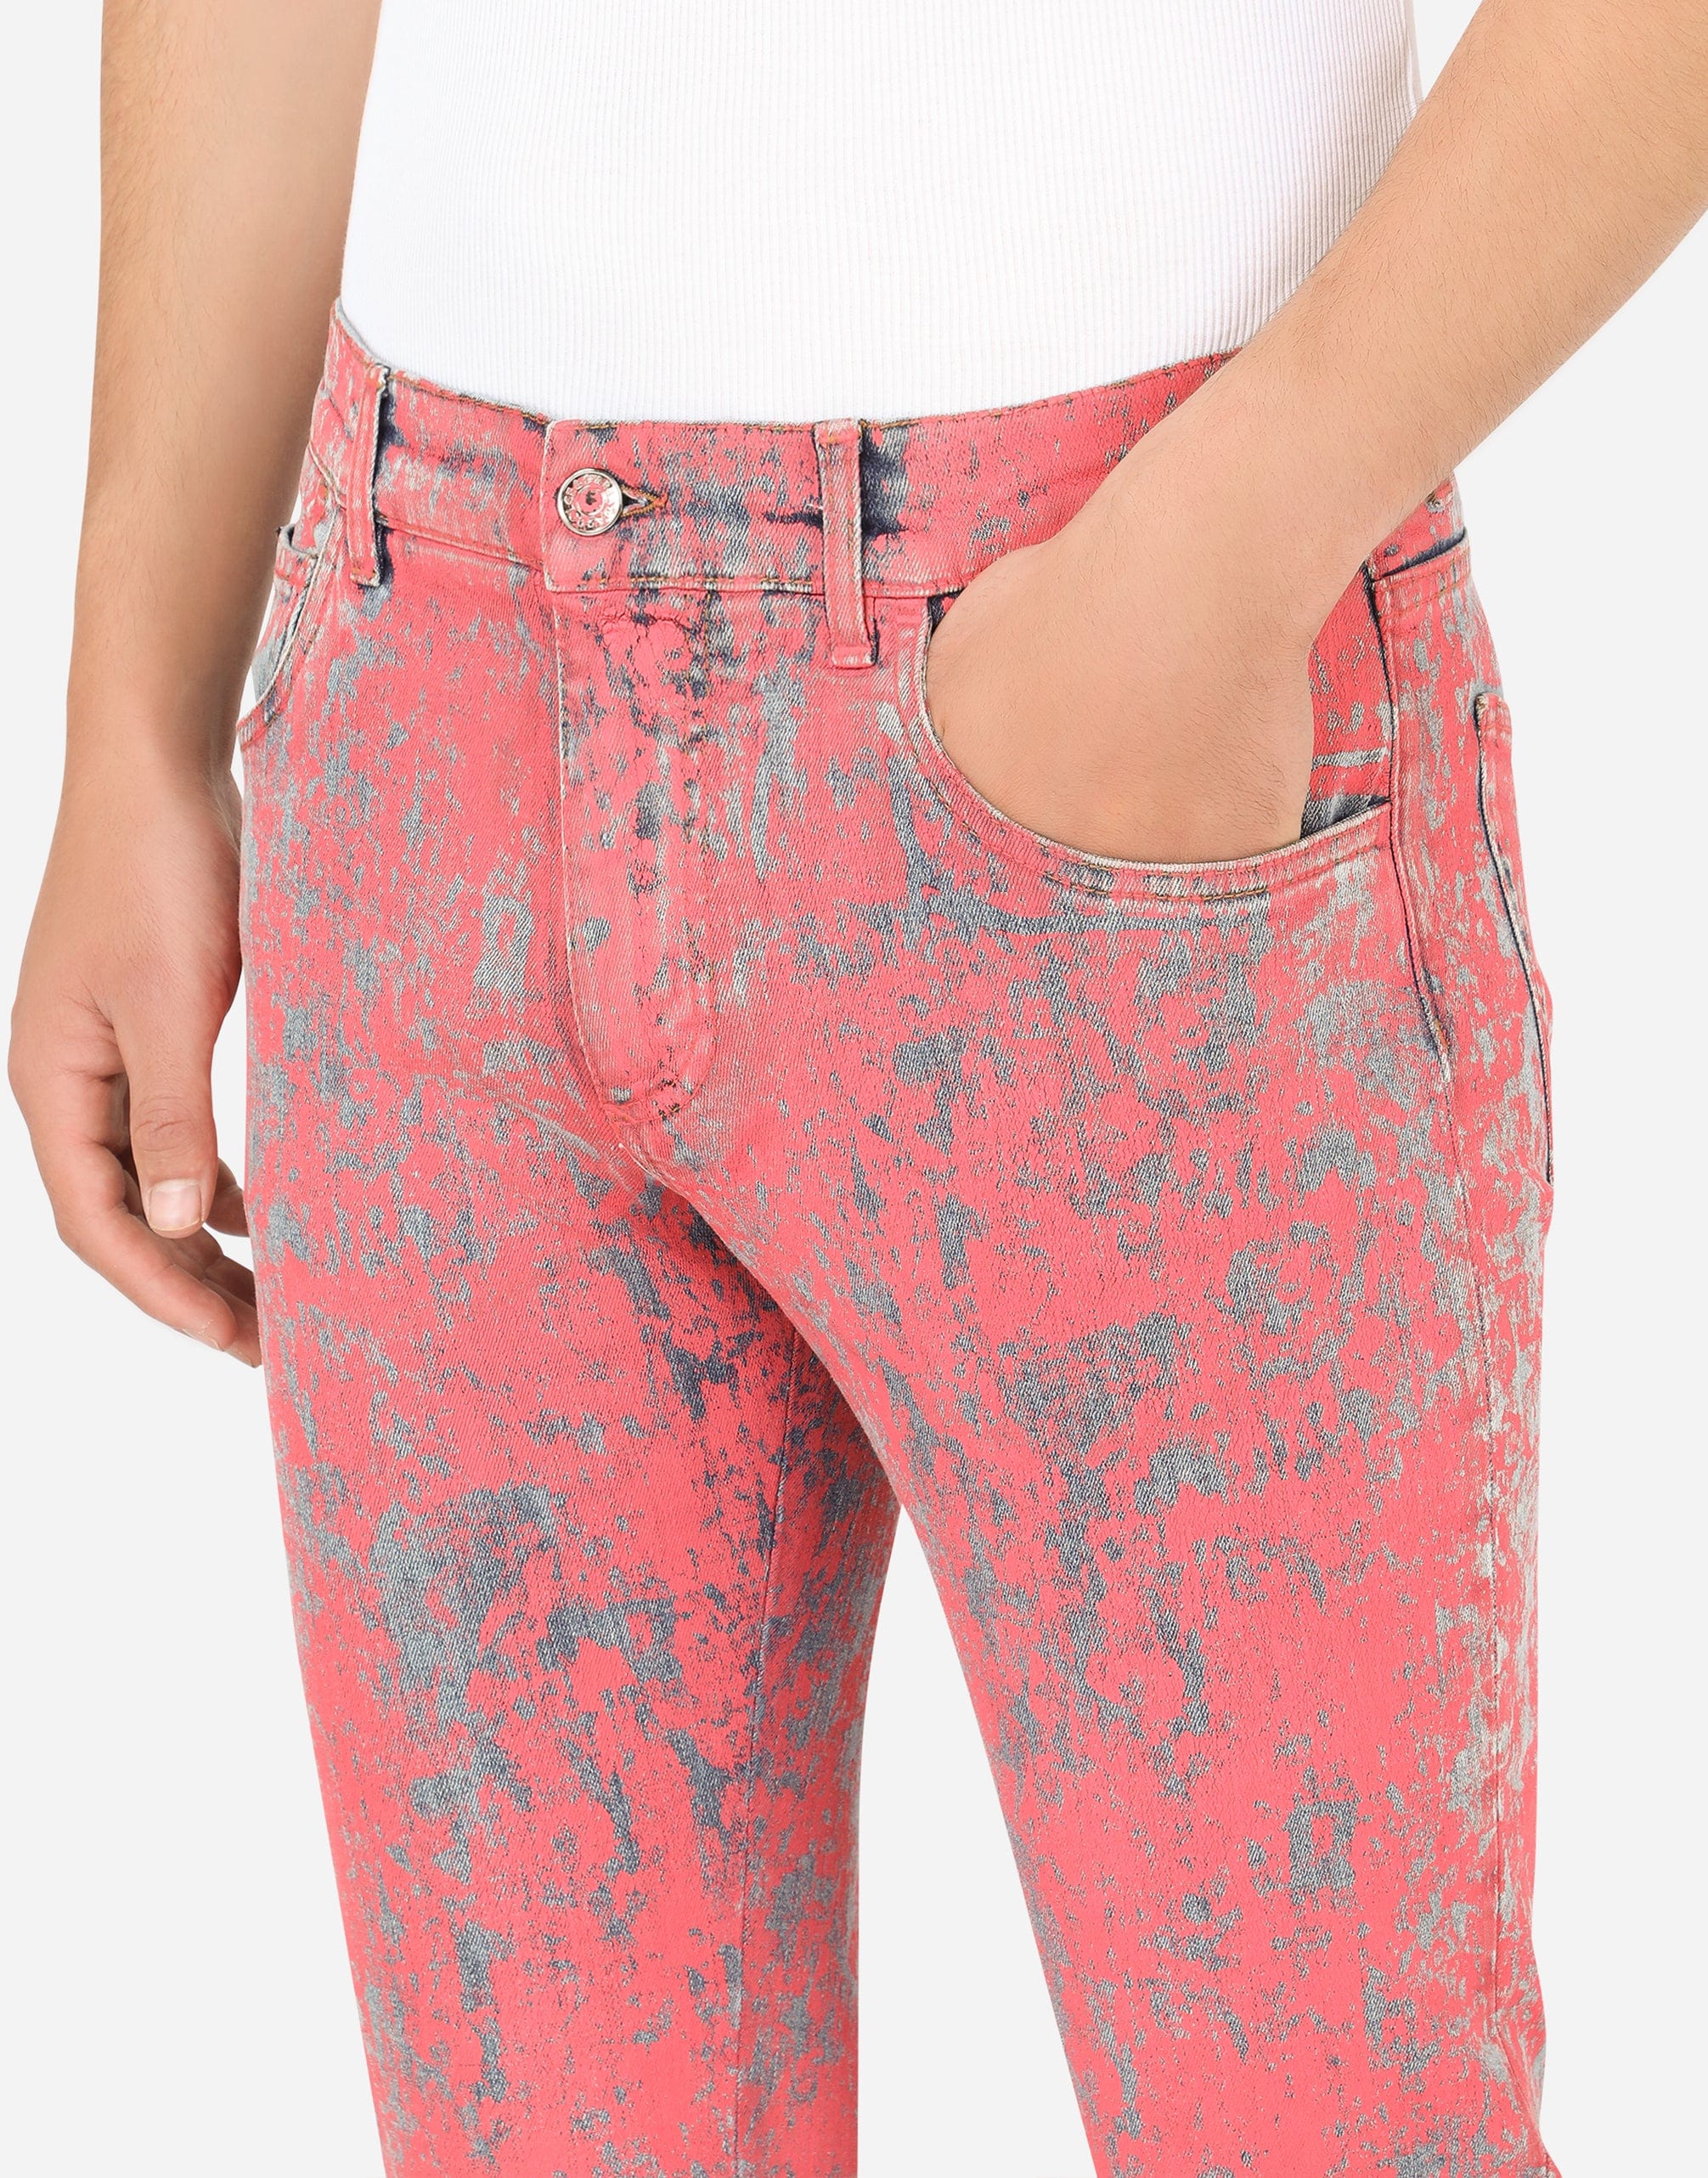 Slim-Fit Stretch Jeans With Marbled Print